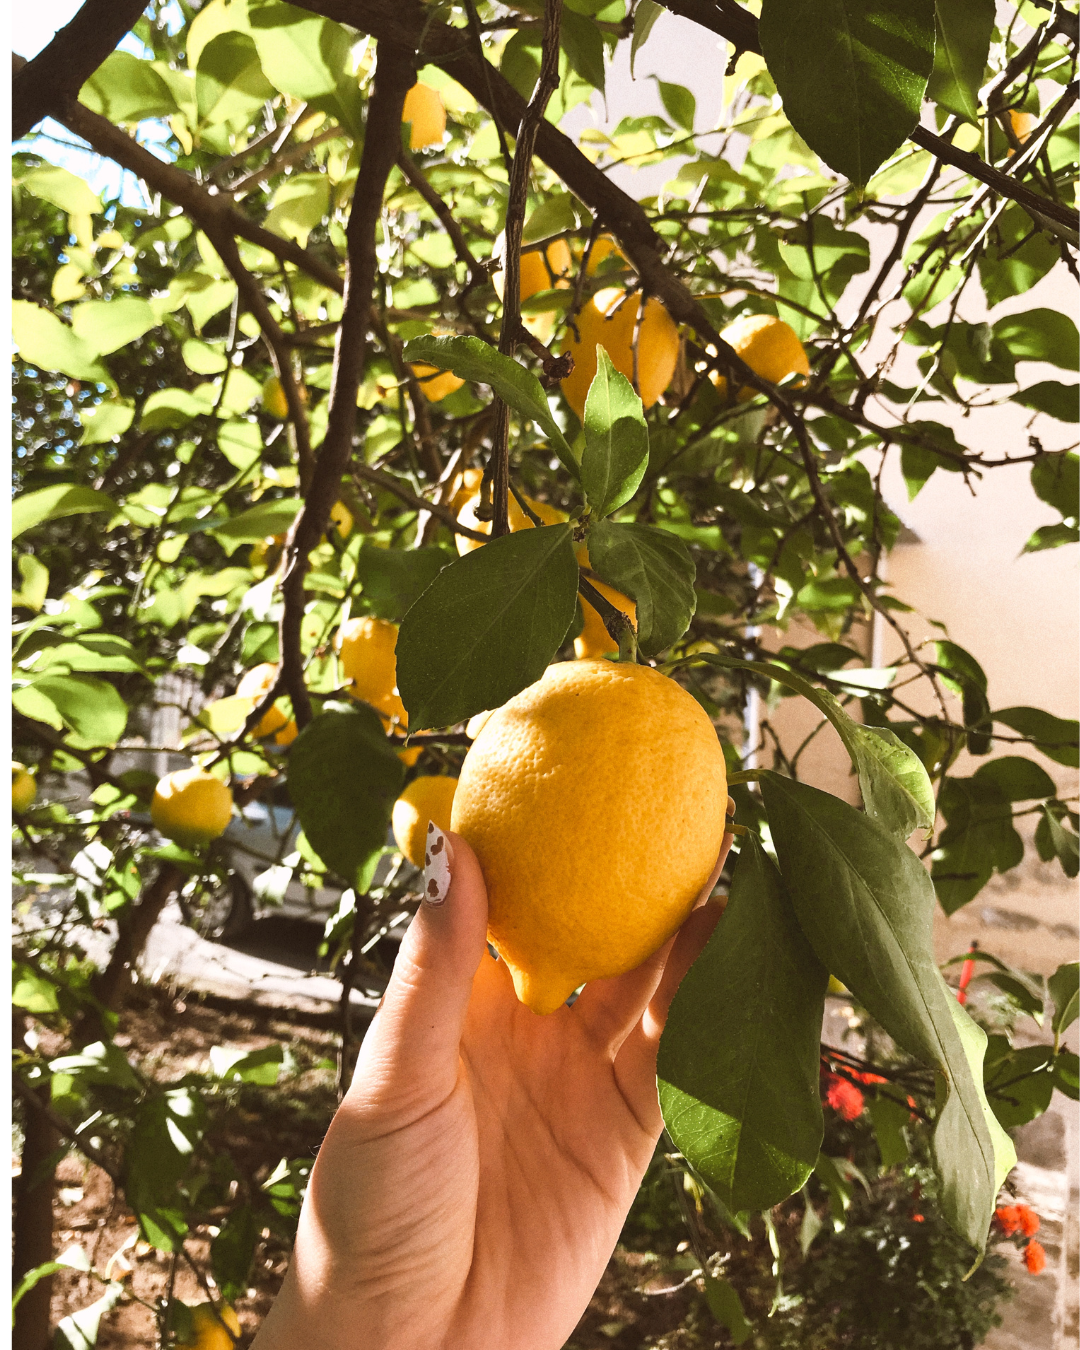 How to plant a citrus tree